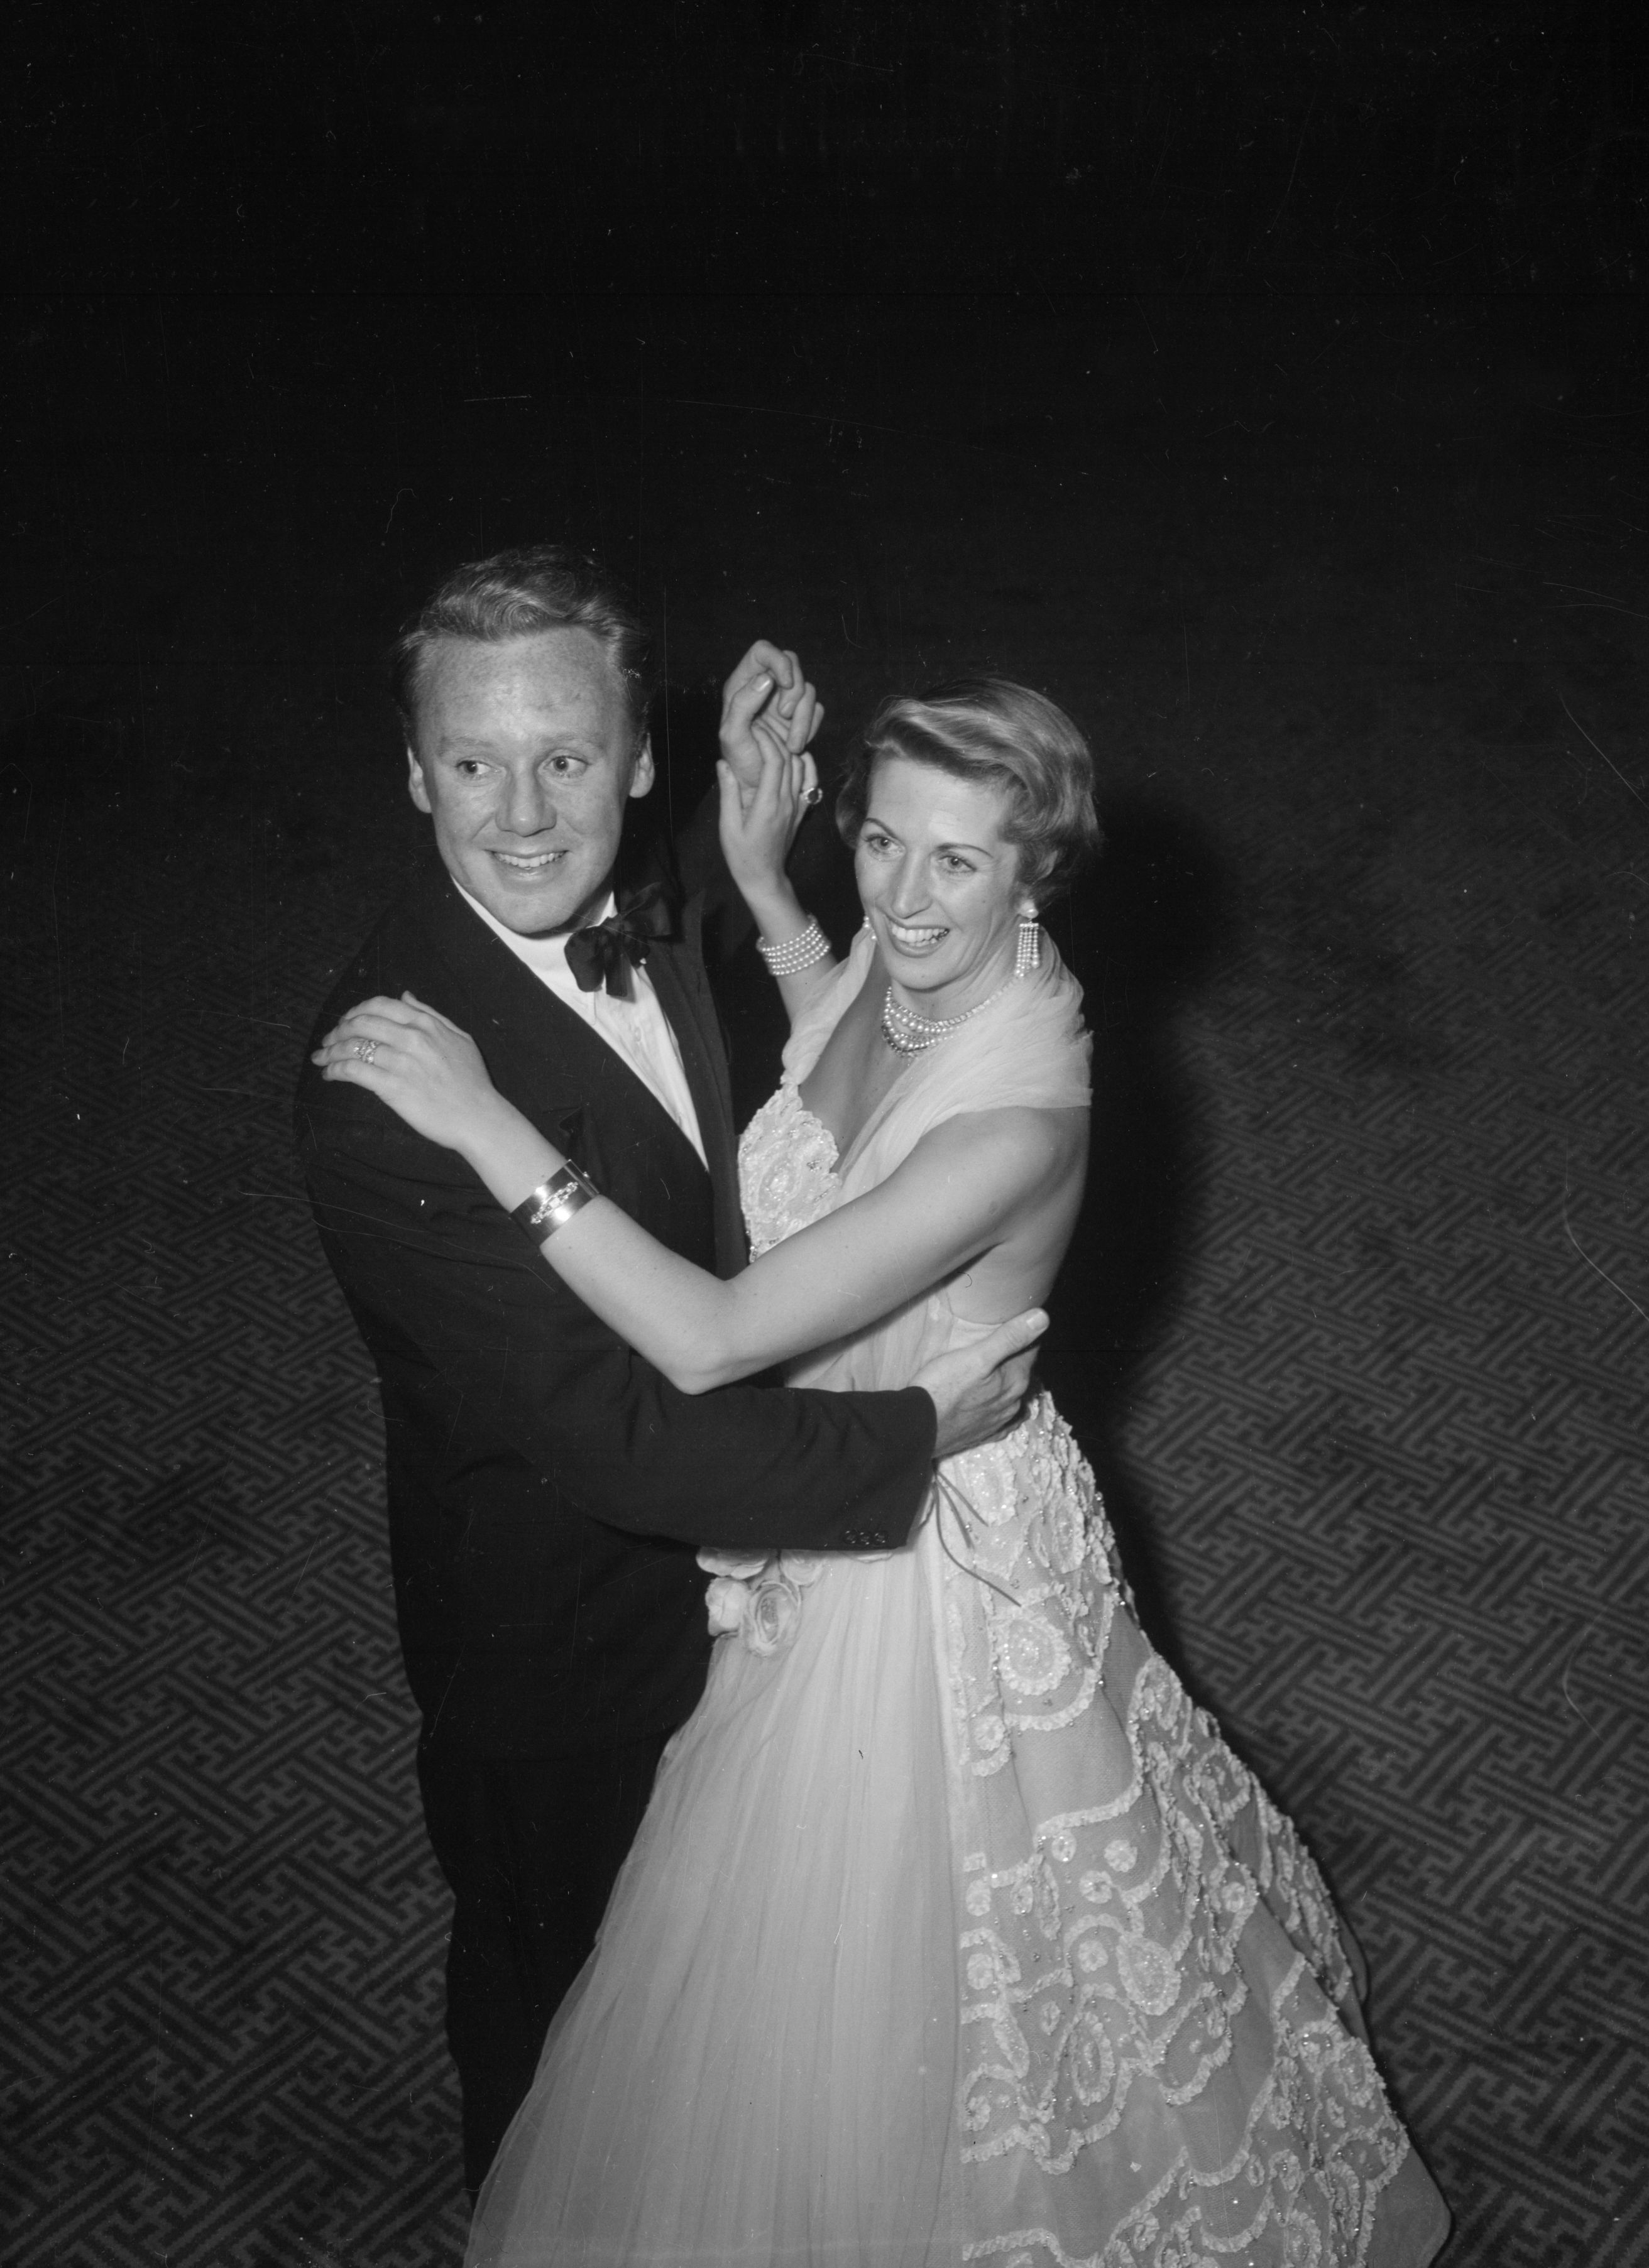 Van Johnson dancing with his wife, Eve "Evie" Abbott circa 1951 | Source: Getty Images